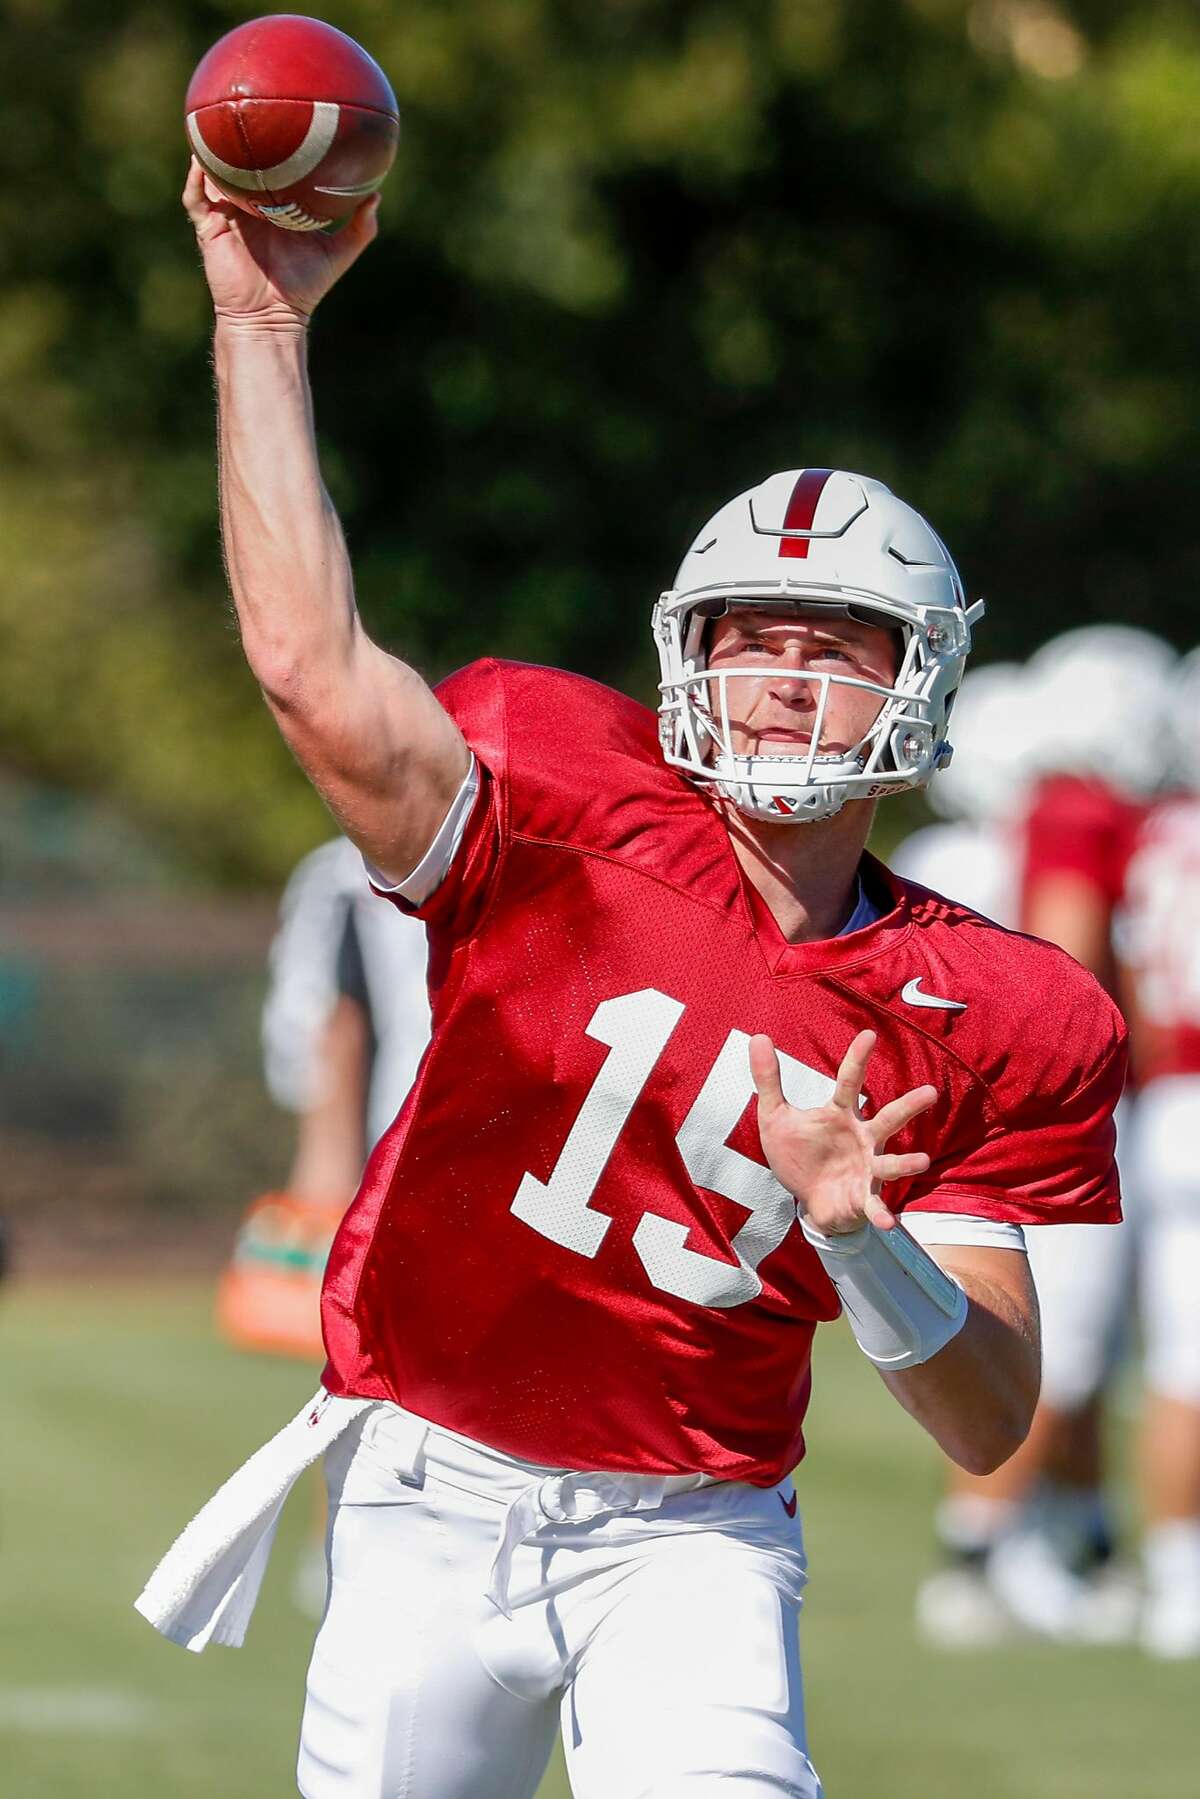 Stanford quarterback Davis Mills (15) throws a ball while doing drills during Stanford football practice at Stanford, Calif., on Monday, August 6, 2018.